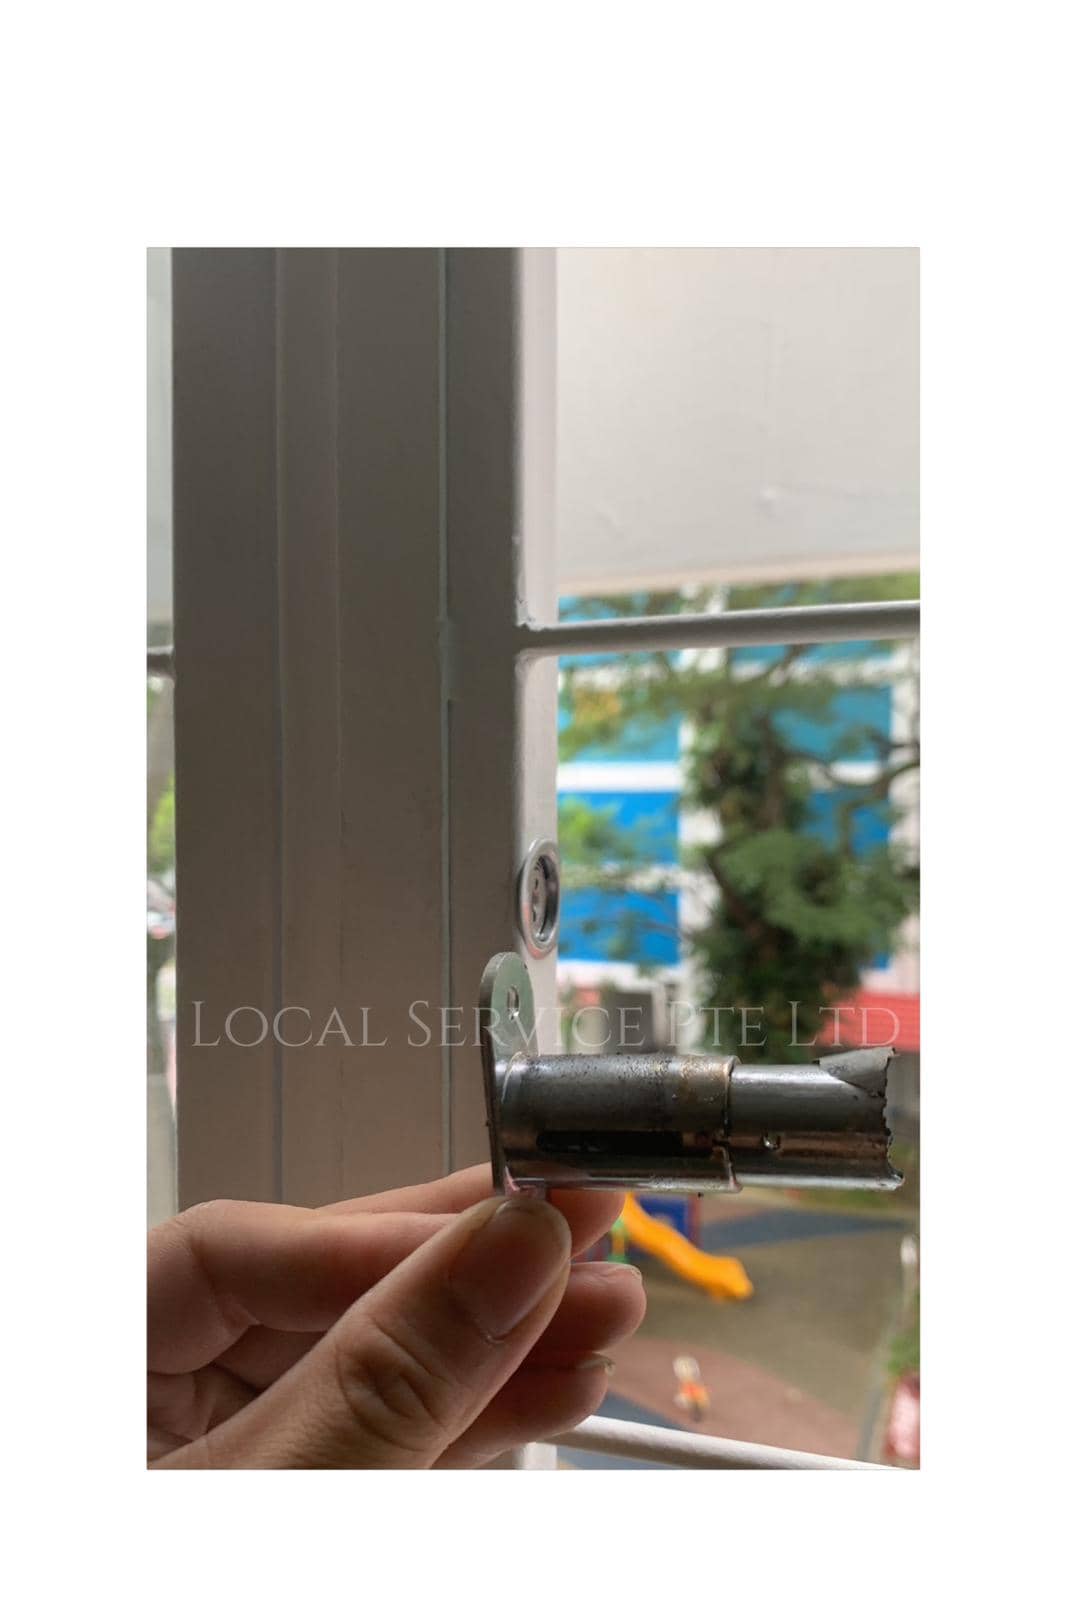 Window Grill Lock Replacement Service